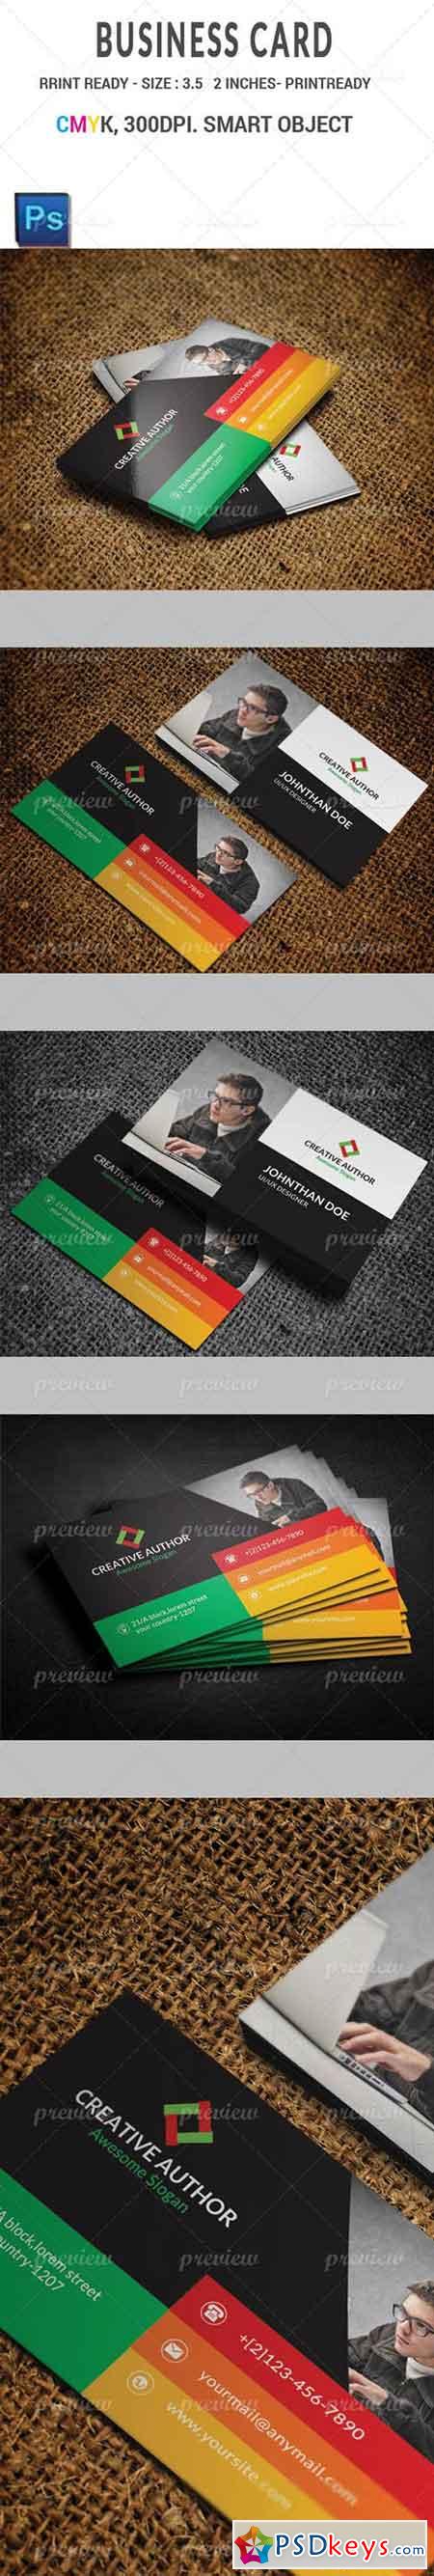 Agency Corporate Business Card 4730